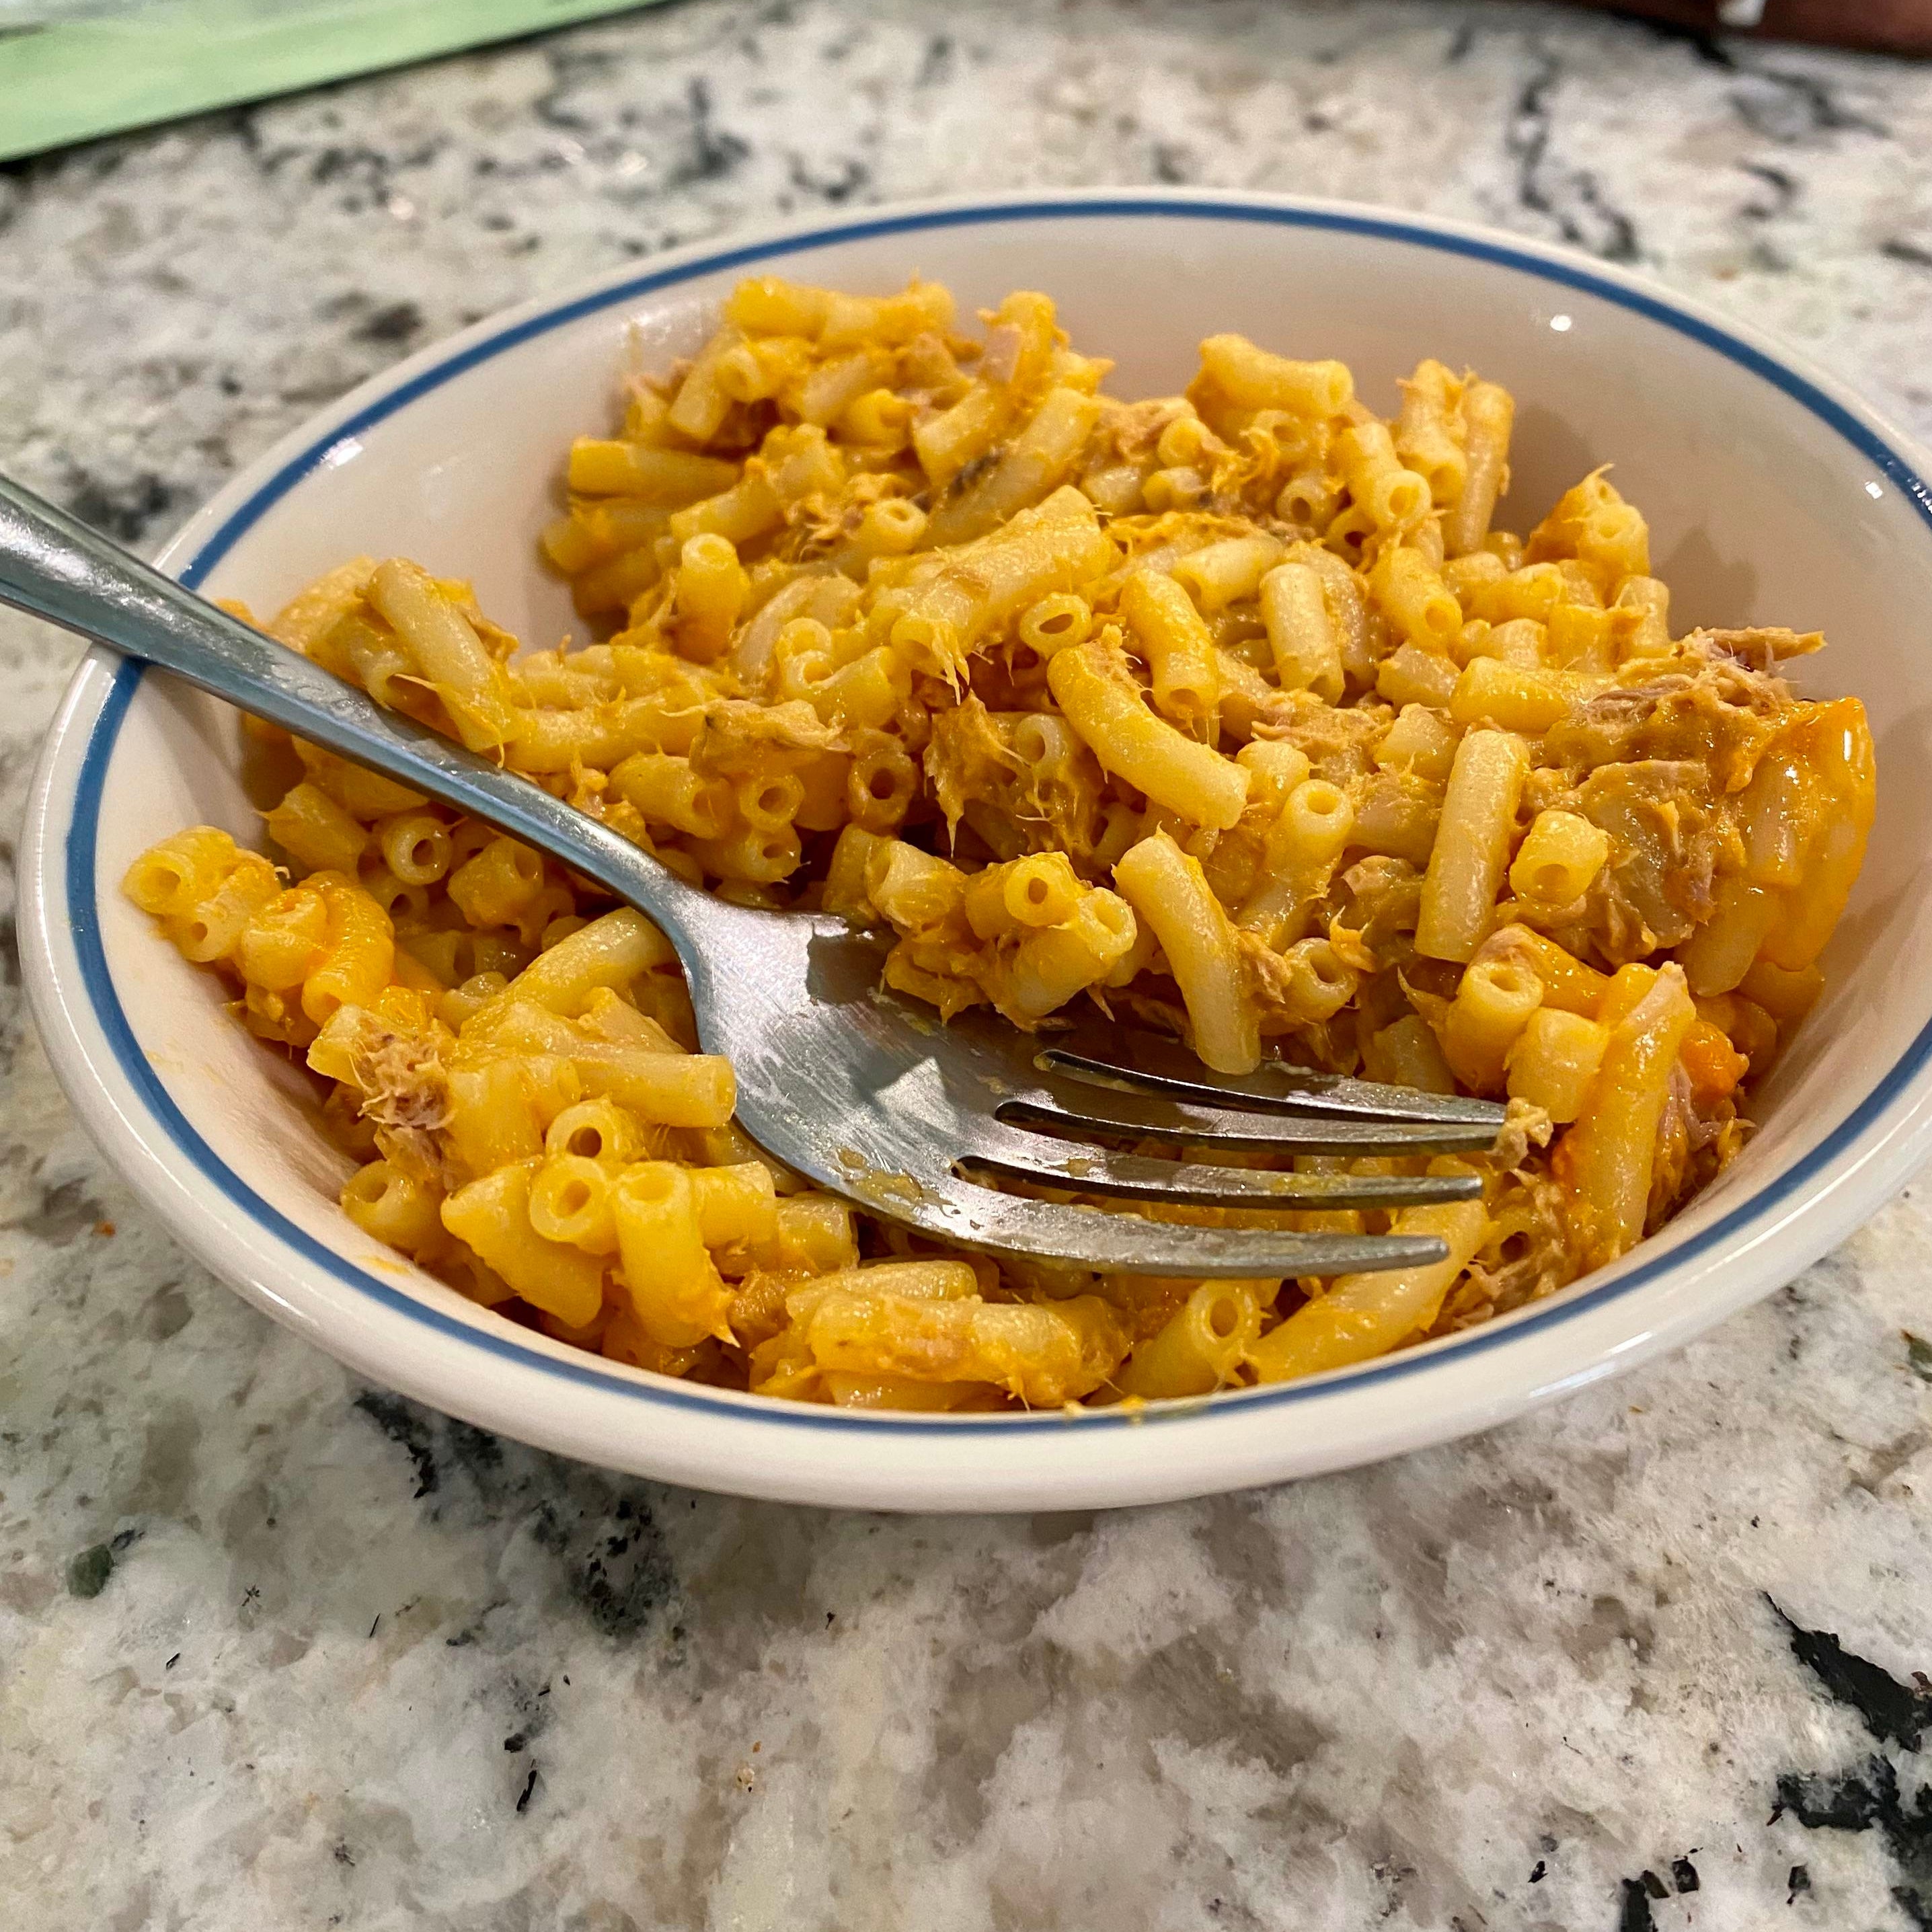 Bowl of macaroni and cheese with a fork on a kitchen counter